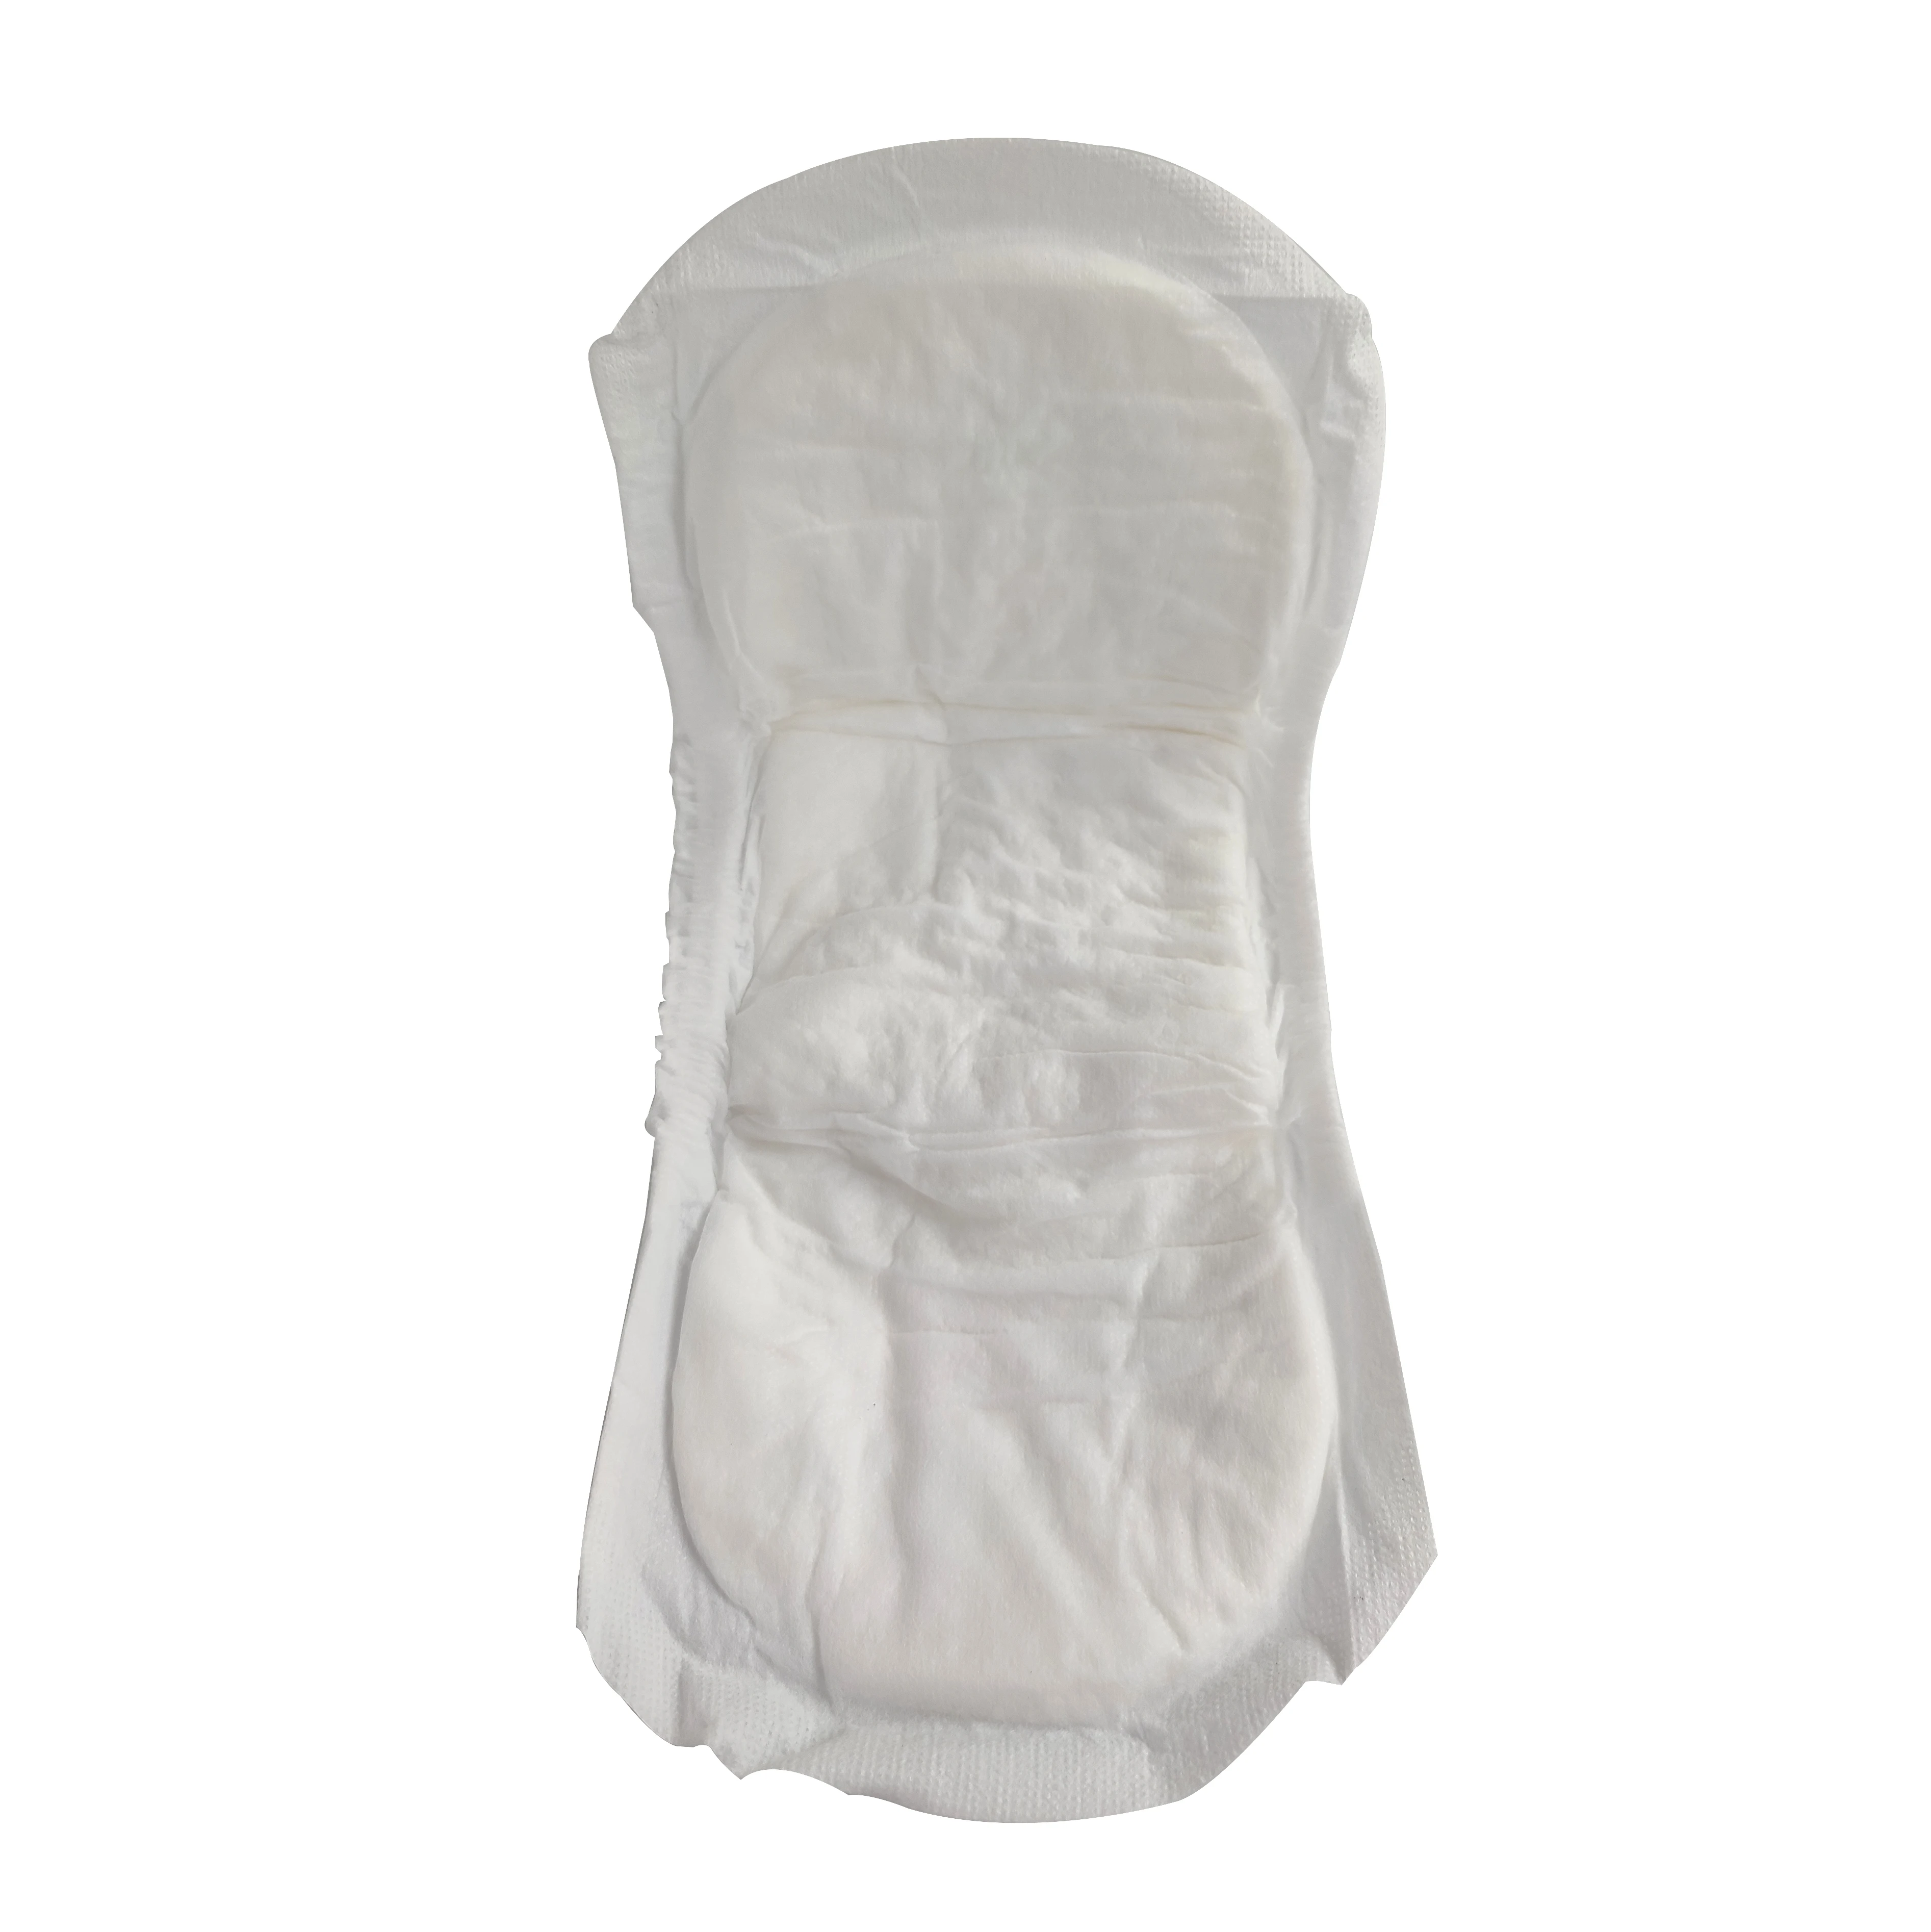 

Mild incontinence pad Absorb a small amount of urine pad Daily mild urine absorption pad